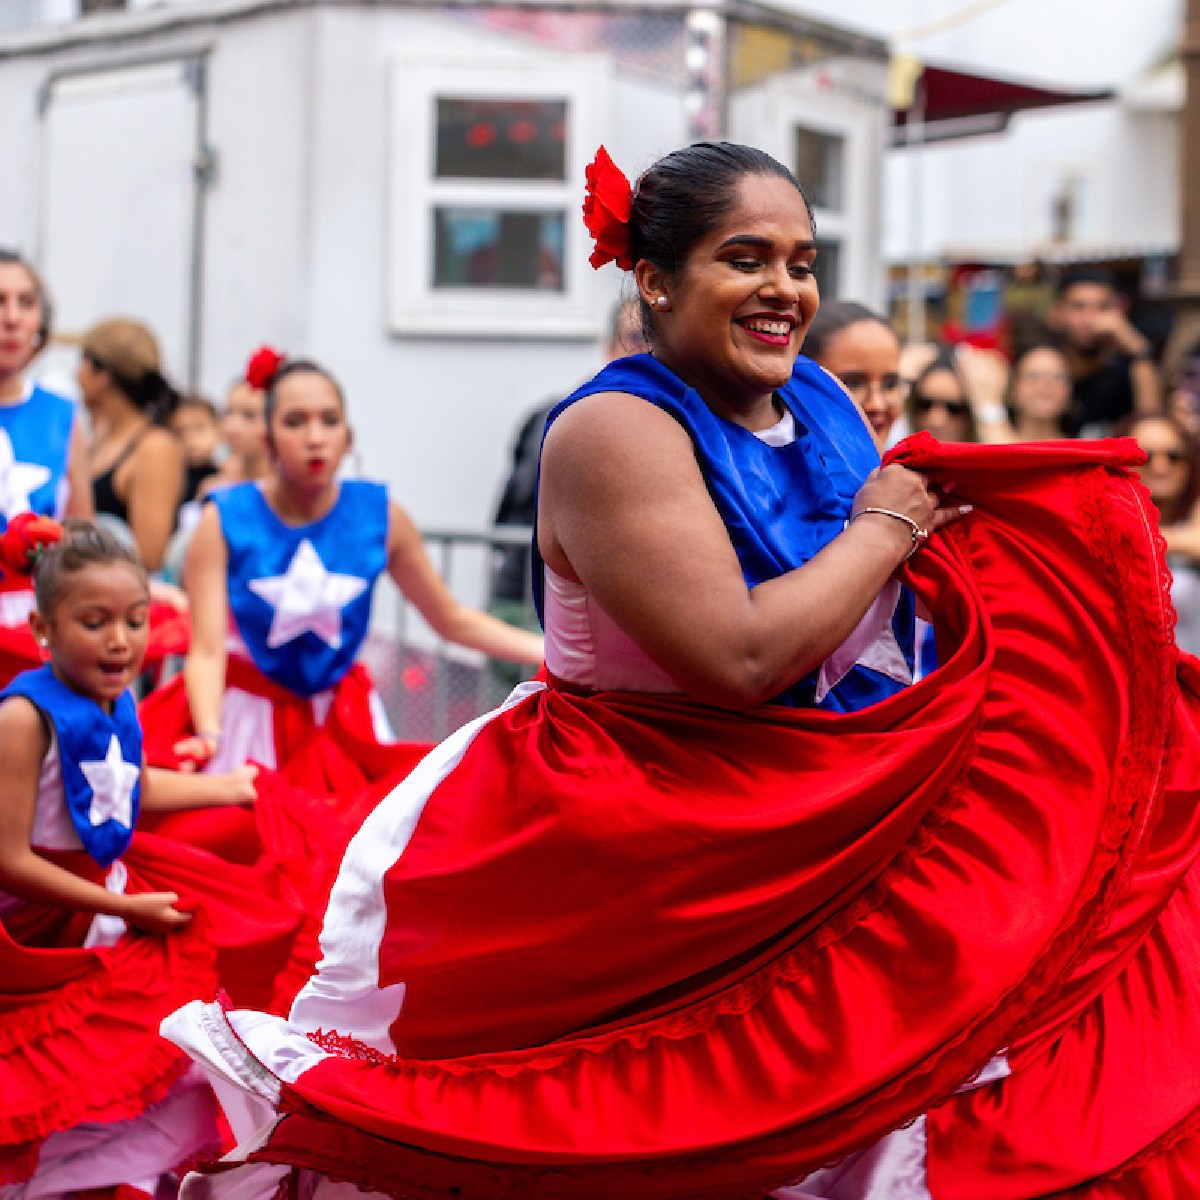 Ready to live it, love it, and #LiveBoricua? Experience Puerto Rico's cultural richness, from festivals to art installations showcasing emerging Boricua talent. Tap here: brnw.ch/21wIM2x to start mapping your adventure. 🗺️✨ #LiveBoricua #DiscoverPuertoRico